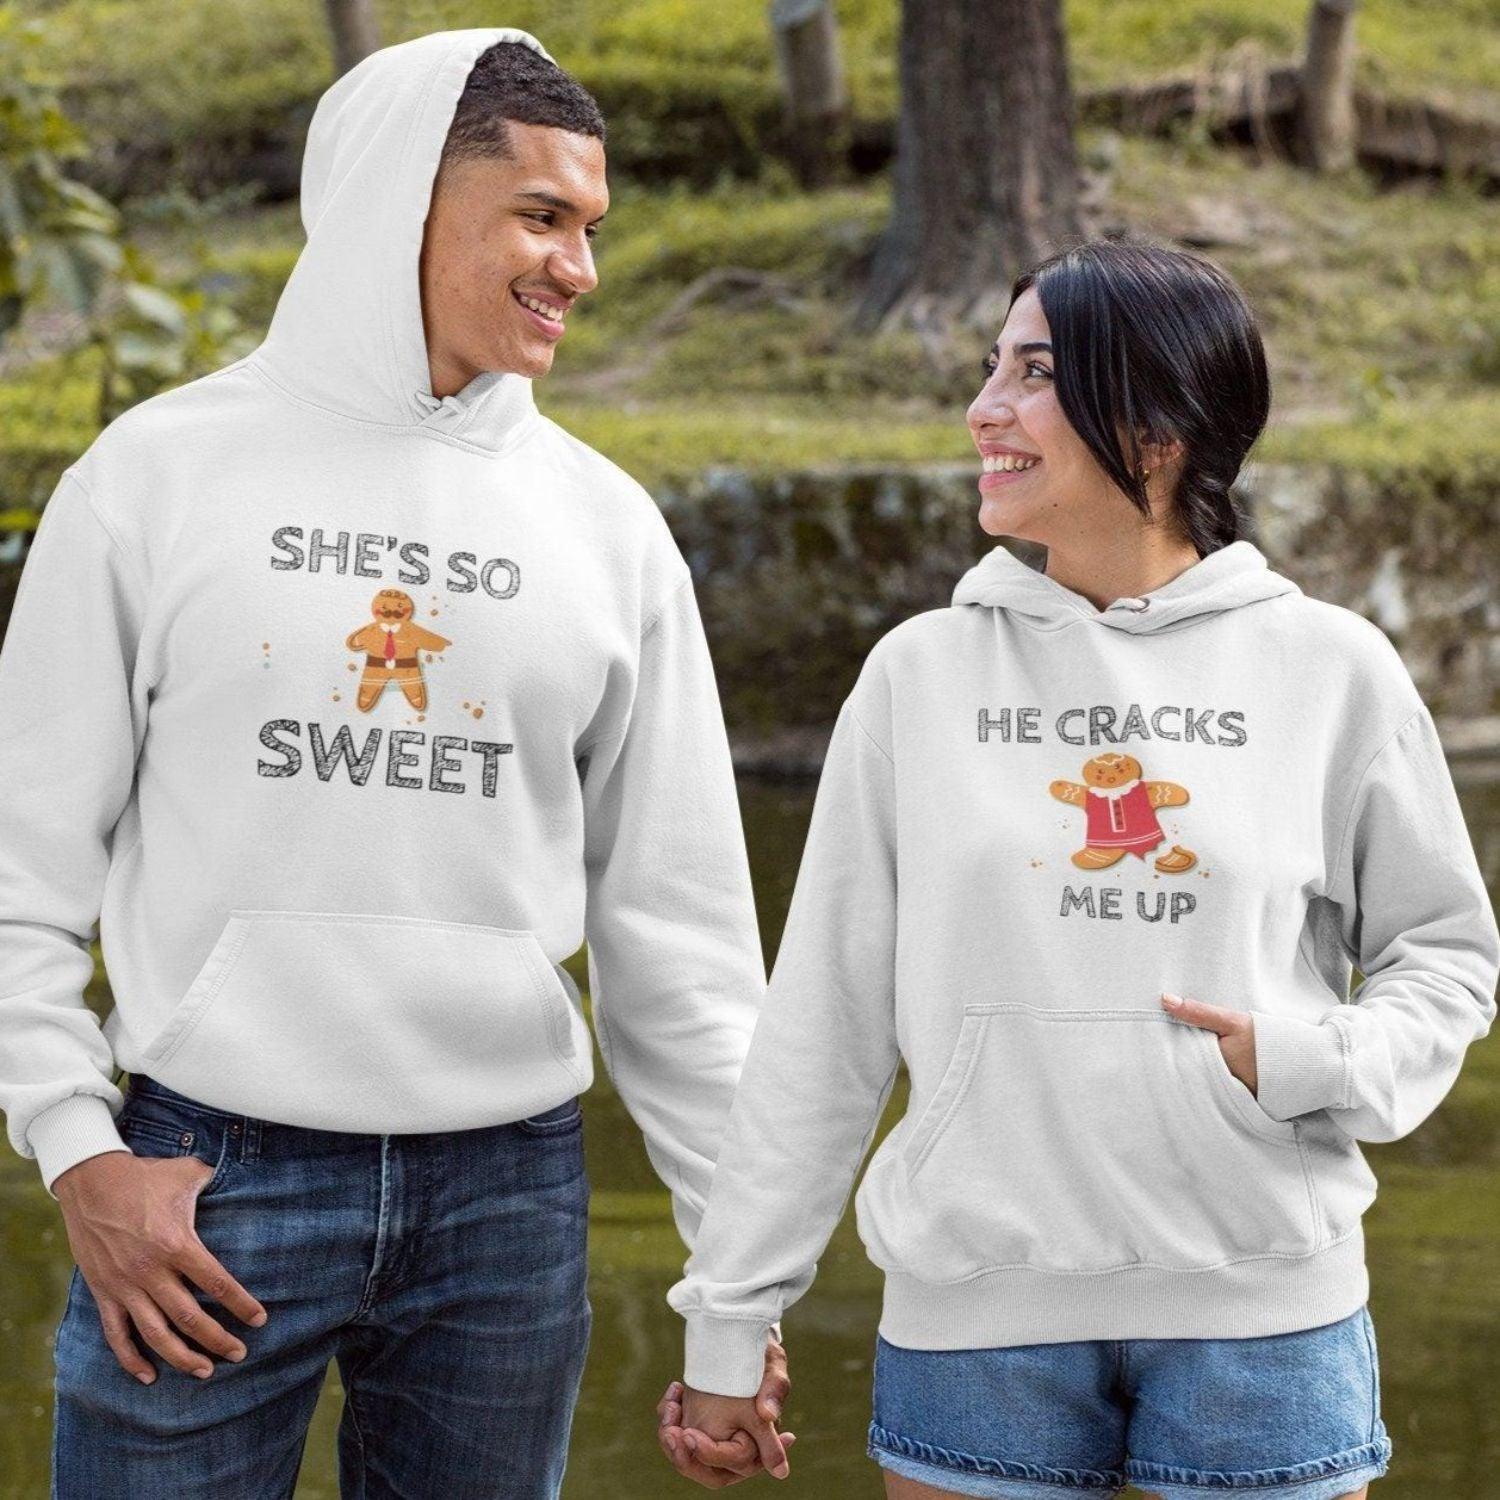 Best Gingerbread Matching Christmas Hoodies  She's So Sweet And He Cracks  Me Up Christmas Couples Hoodie - Family Christmas Pajamas By Jenny